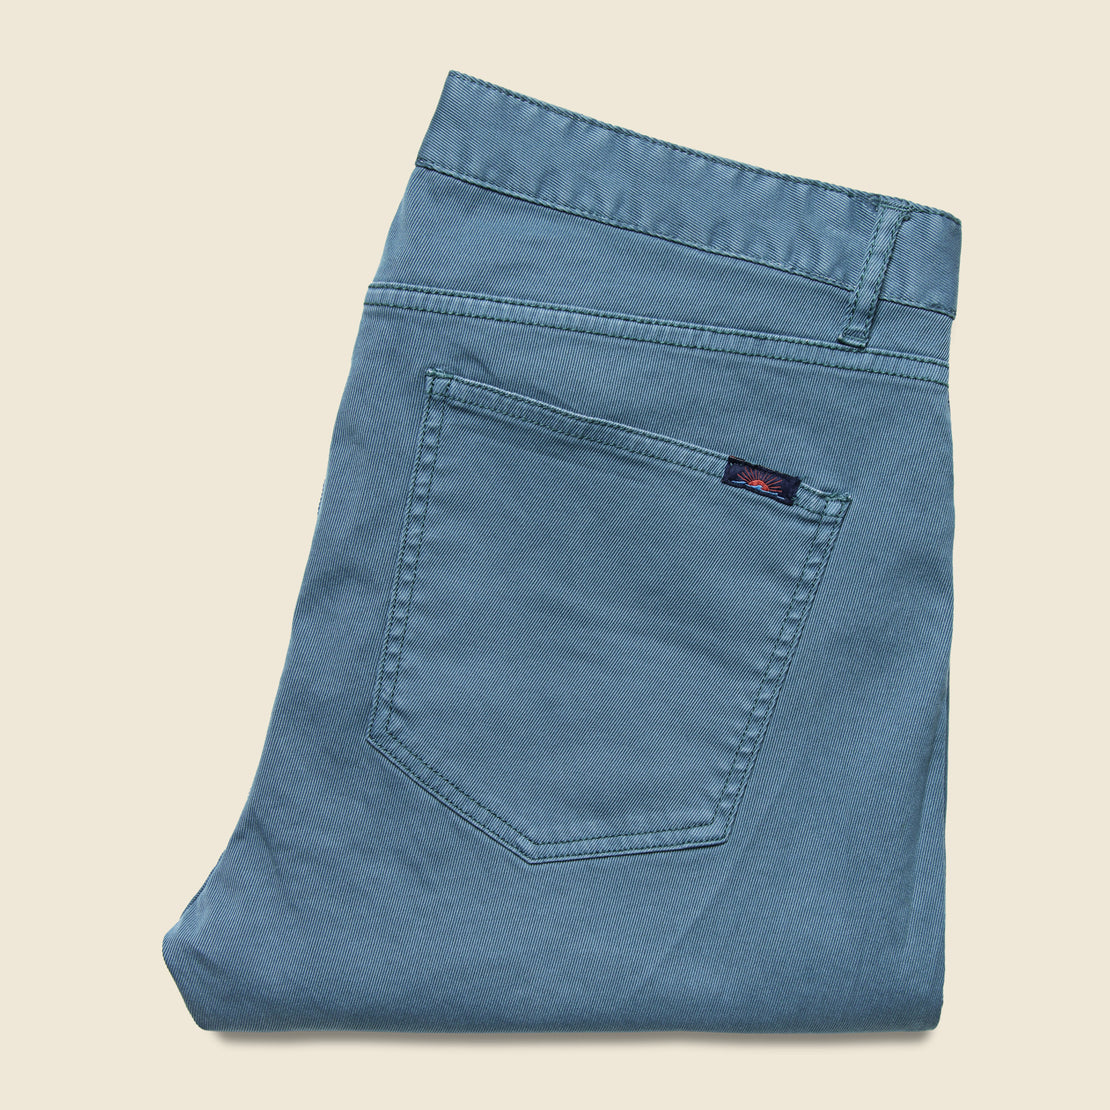 Comfort Twill Jean - Washed Blue - Faherty - STAG Provisions - Pants - Twill